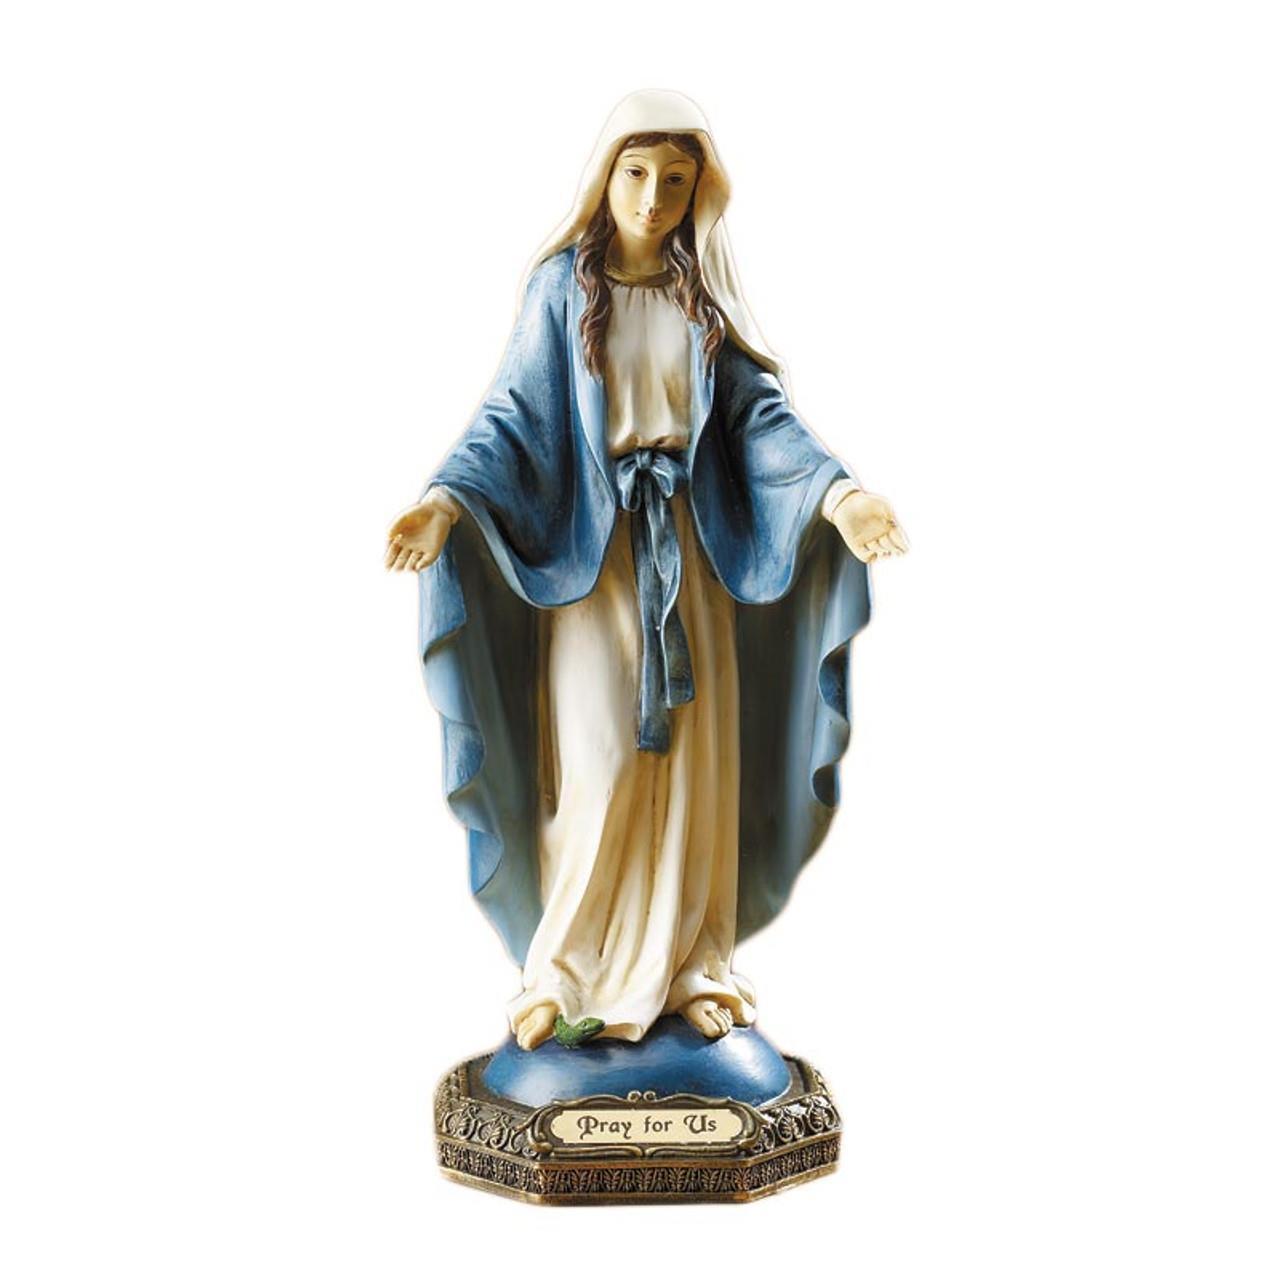 Hartland Our Lady of Grace Plastic Madonna 9 Inch Virgin Mary Statue Figure